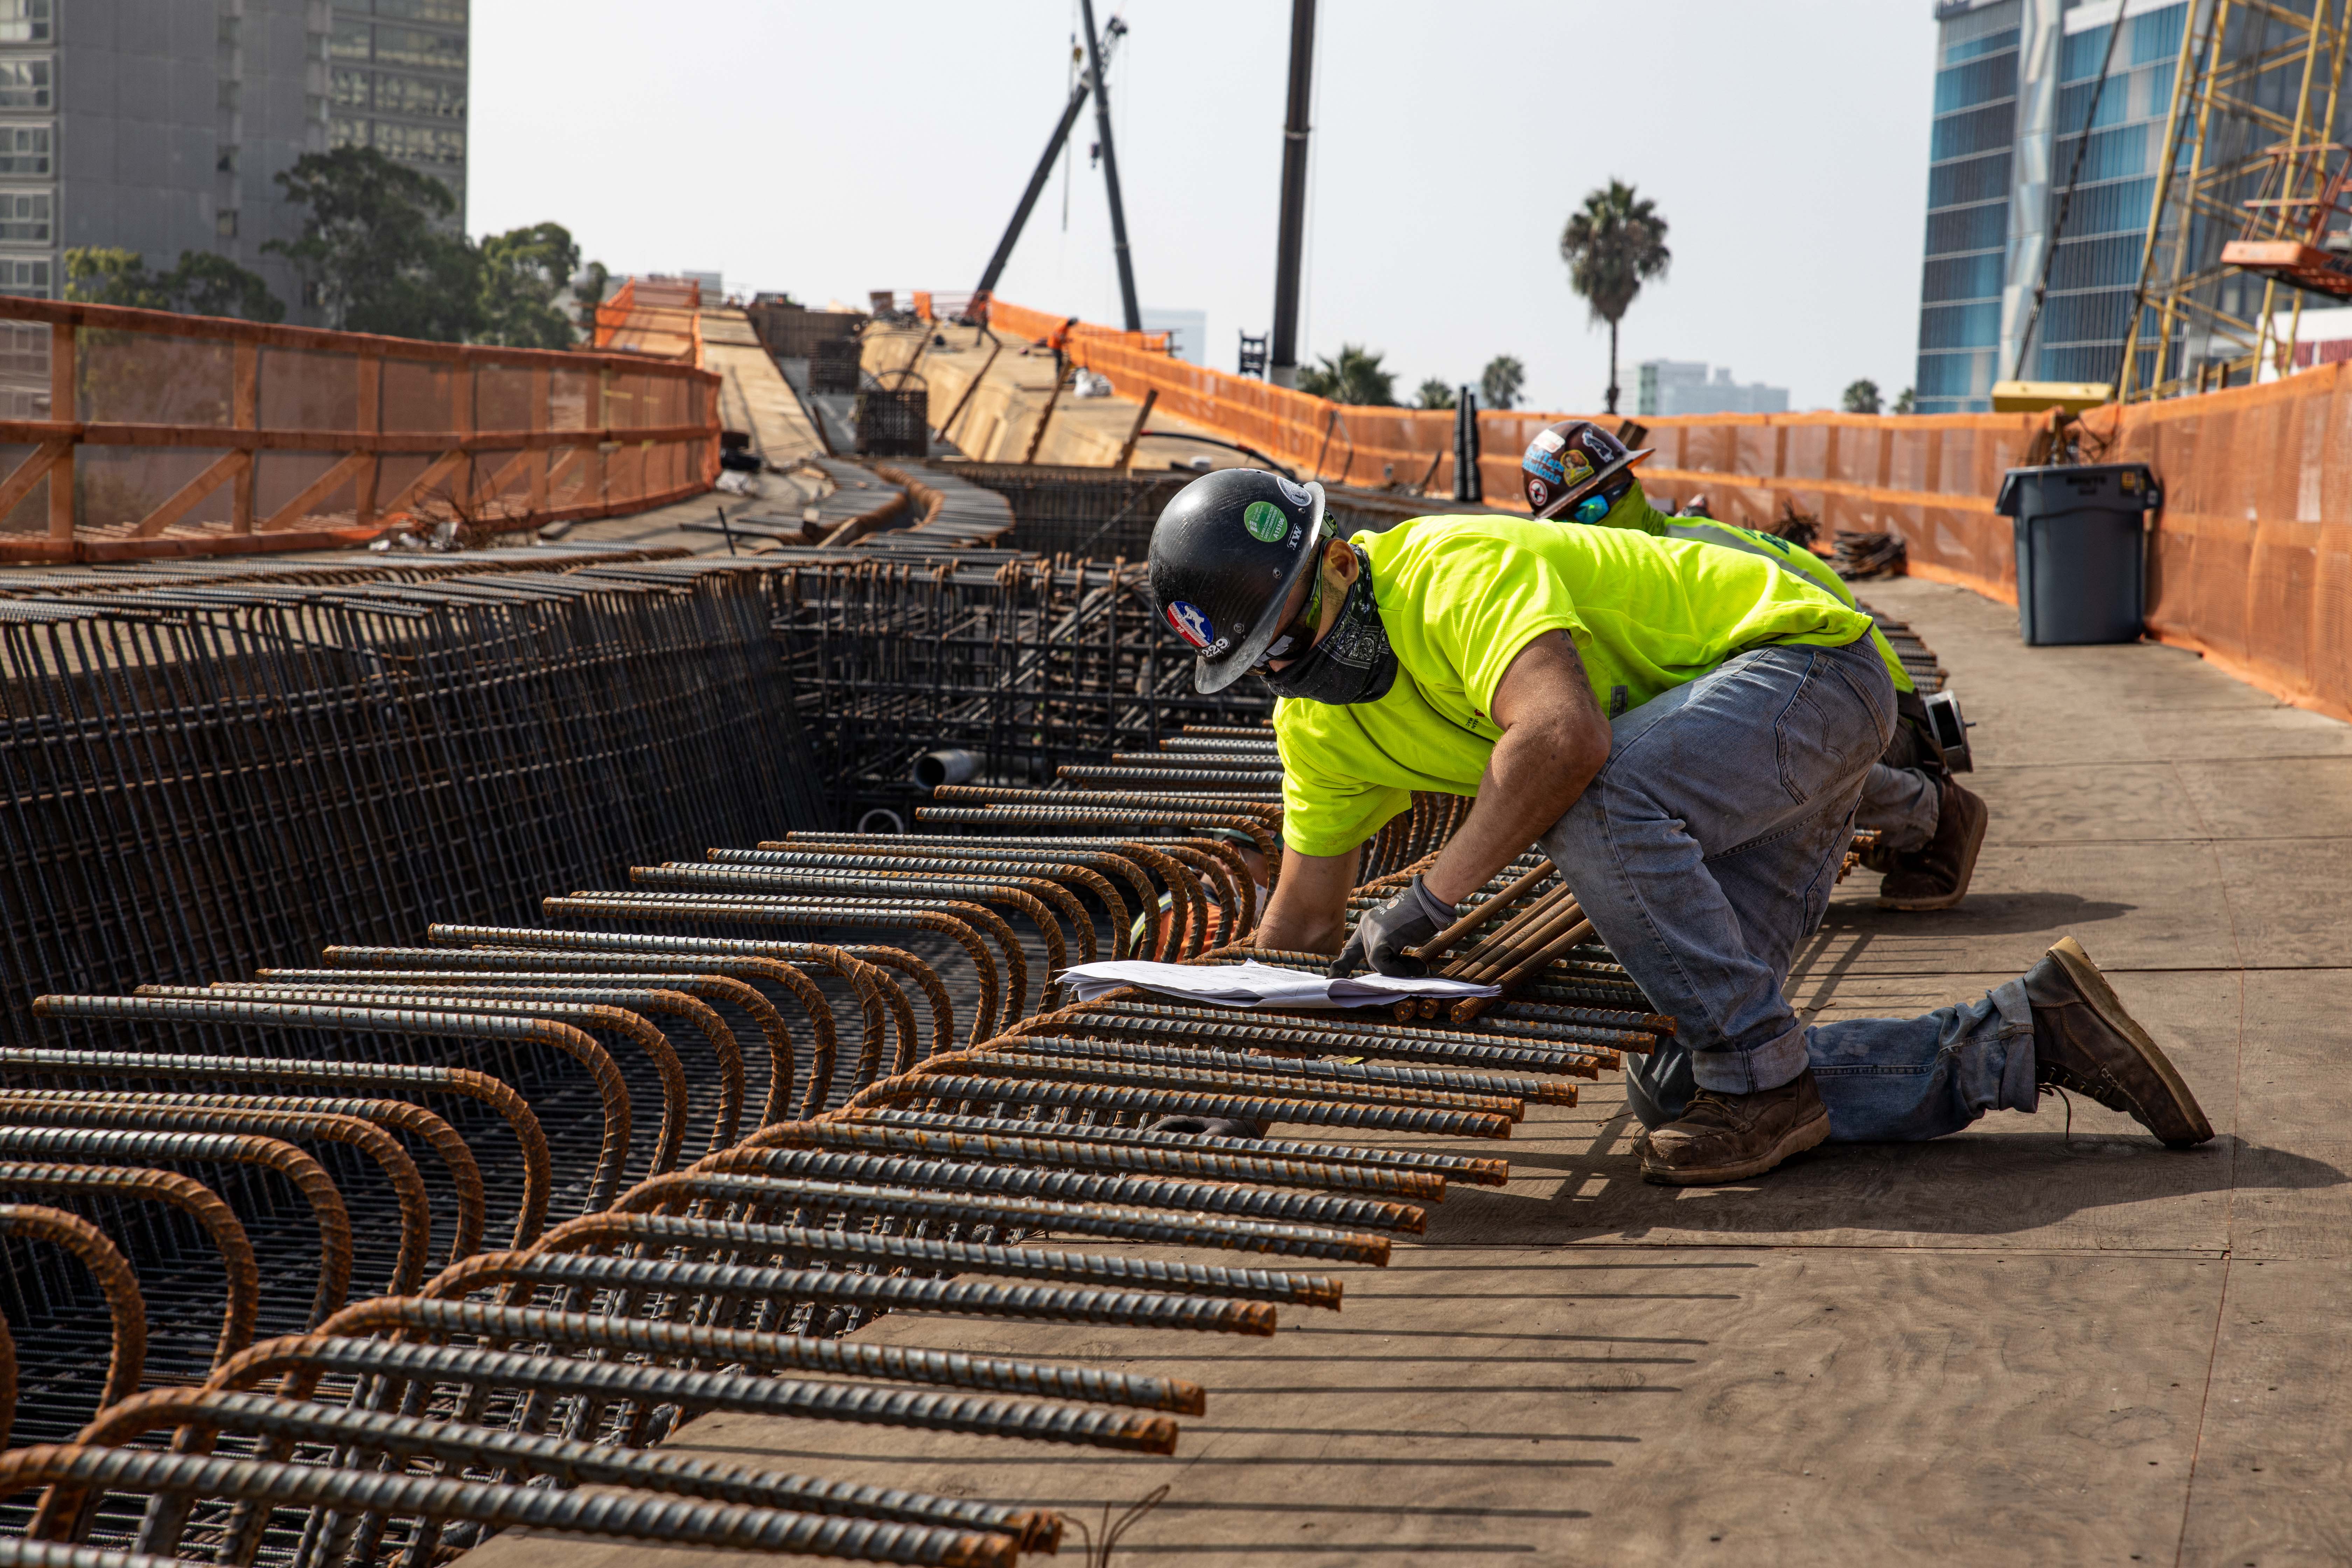 Workers verify correct placement of the guideway reinforcement bar.